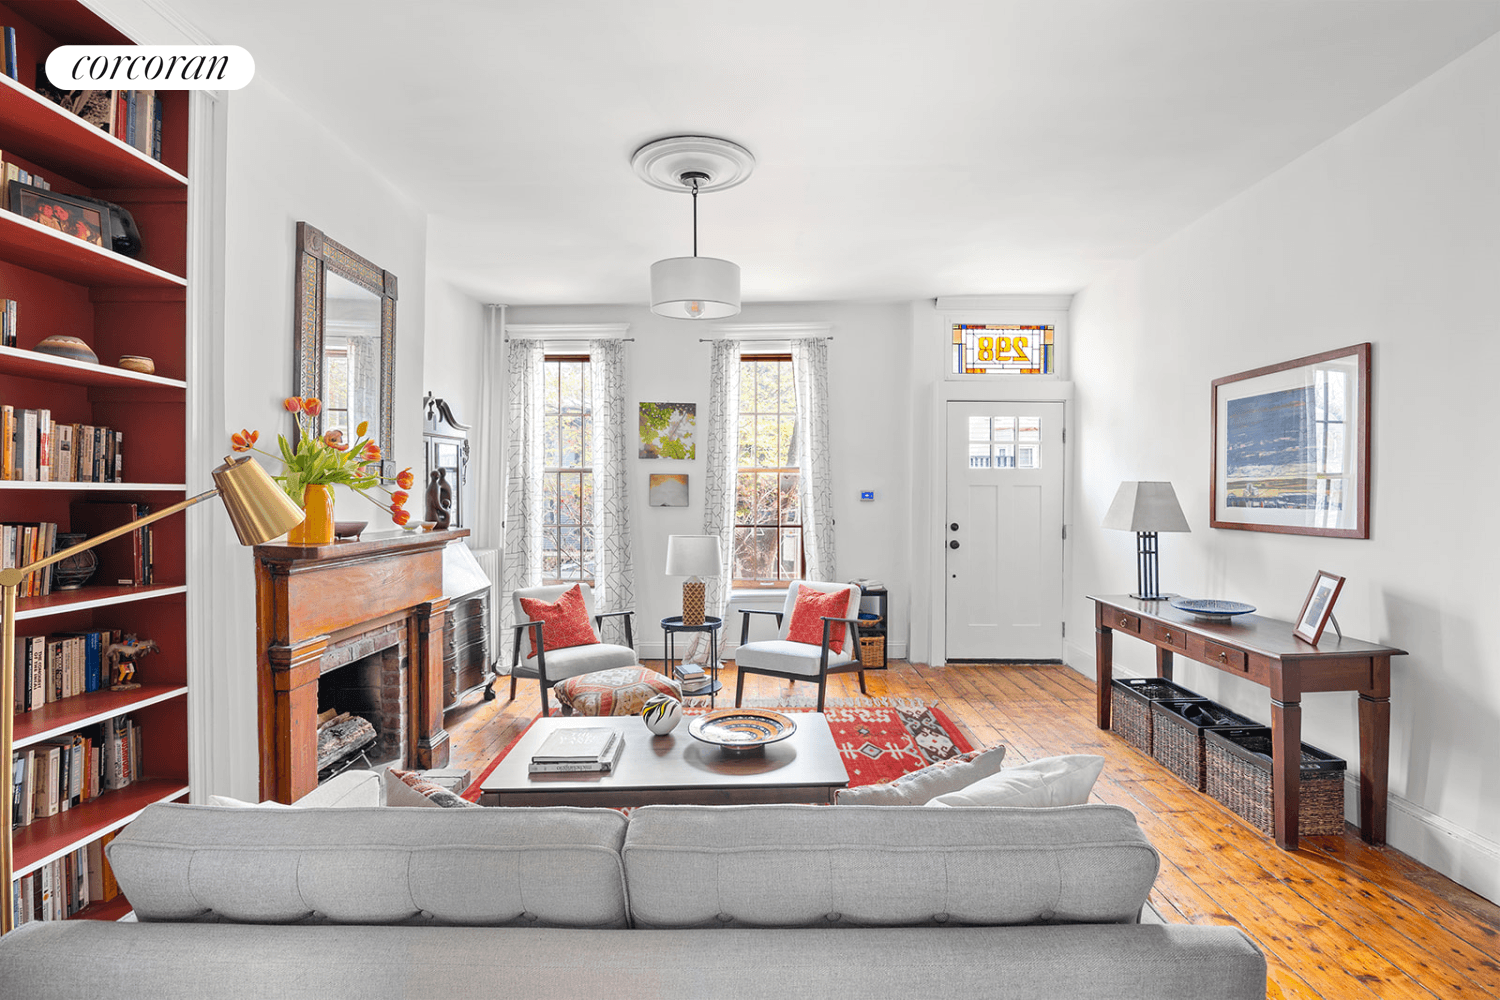 298 14th Street An elegant, turn of the century home, bright and charming with historic details like stained glass, restored working fireplace and original pine floors.